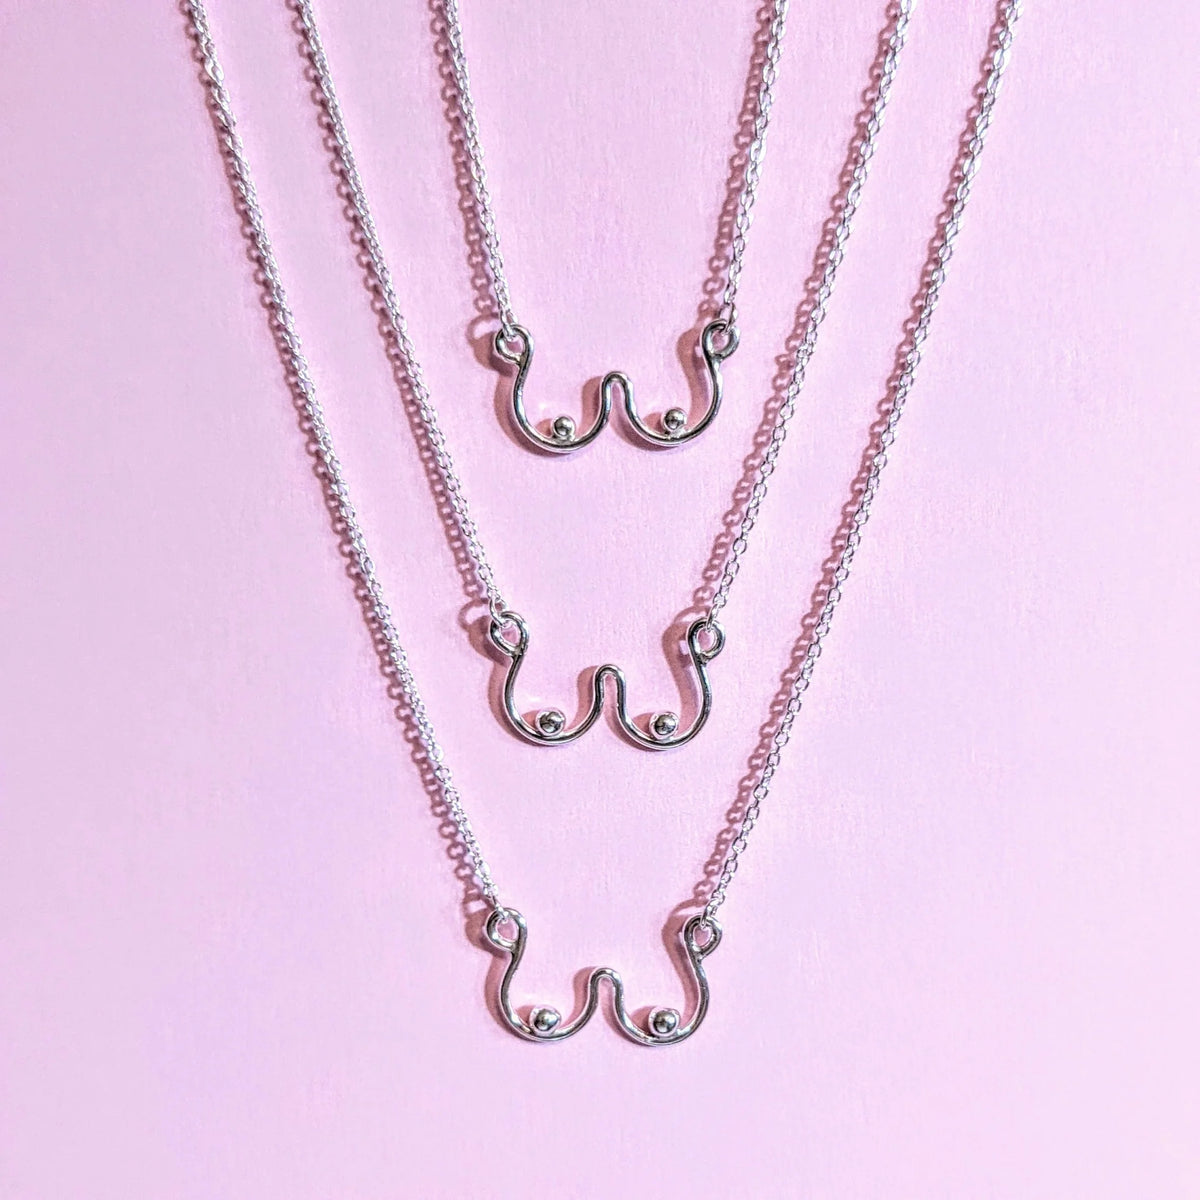 Boob necklaces are a thing now